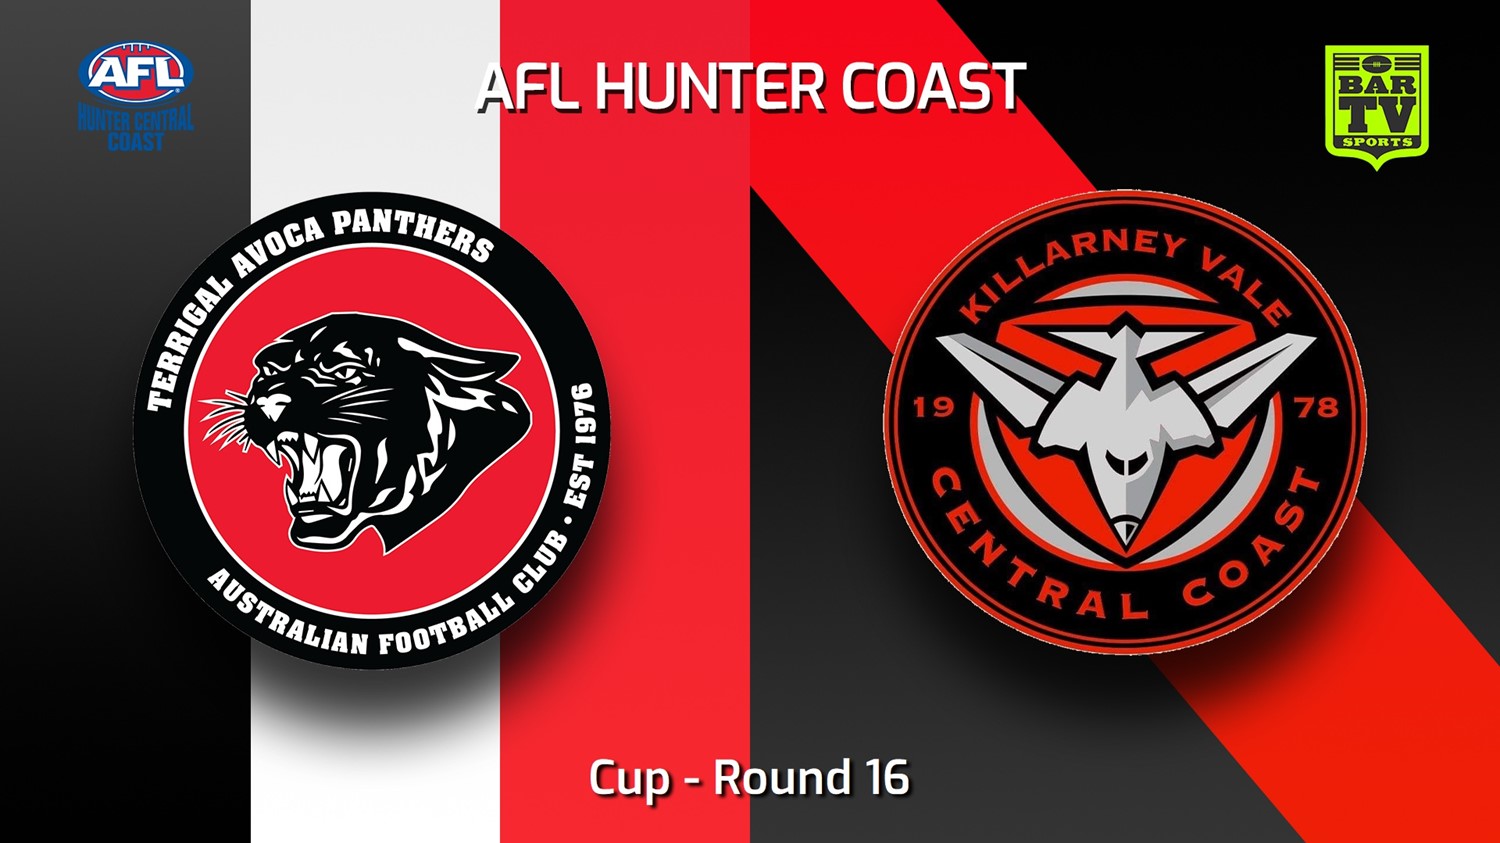 230805-AFL Hunter Central Coast Round 16 - Cup - Terrigal Avoca Panthers v Killarney Vale Bombers Minigame Slate Image